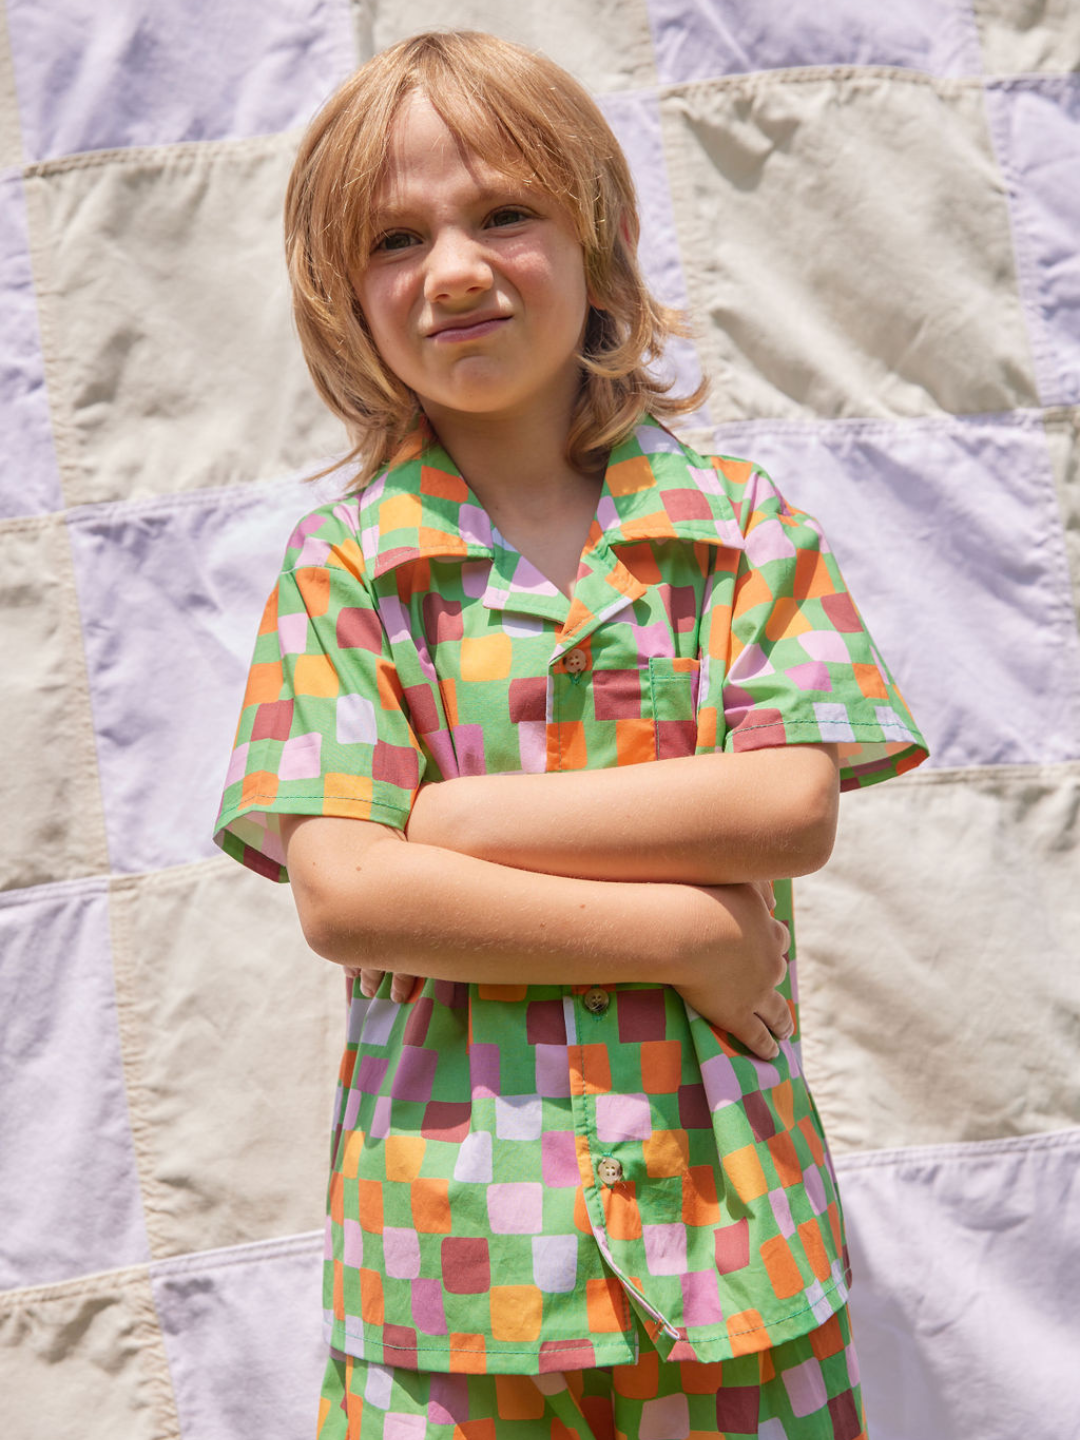 Green | A child wearing a kids' shirt and shorts set in a pattern of purple, pink, gold and orange squares on a green background